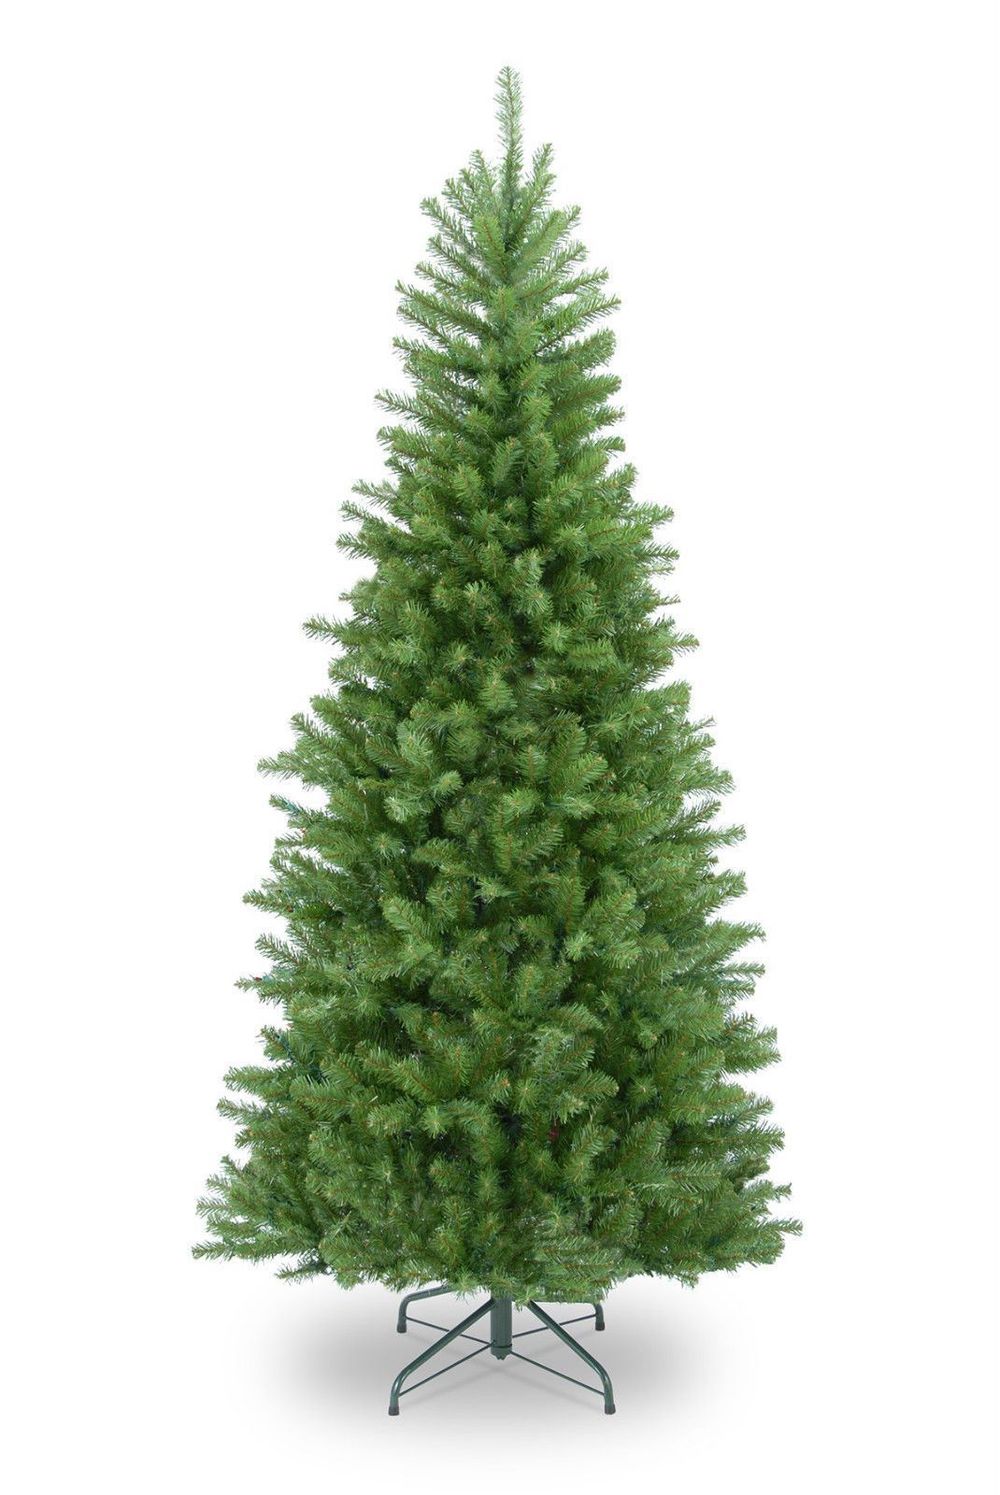 5FT GREEN ARTIFICIAL Christmas Tree Colorado 150cm WITH Red Pocket Bag